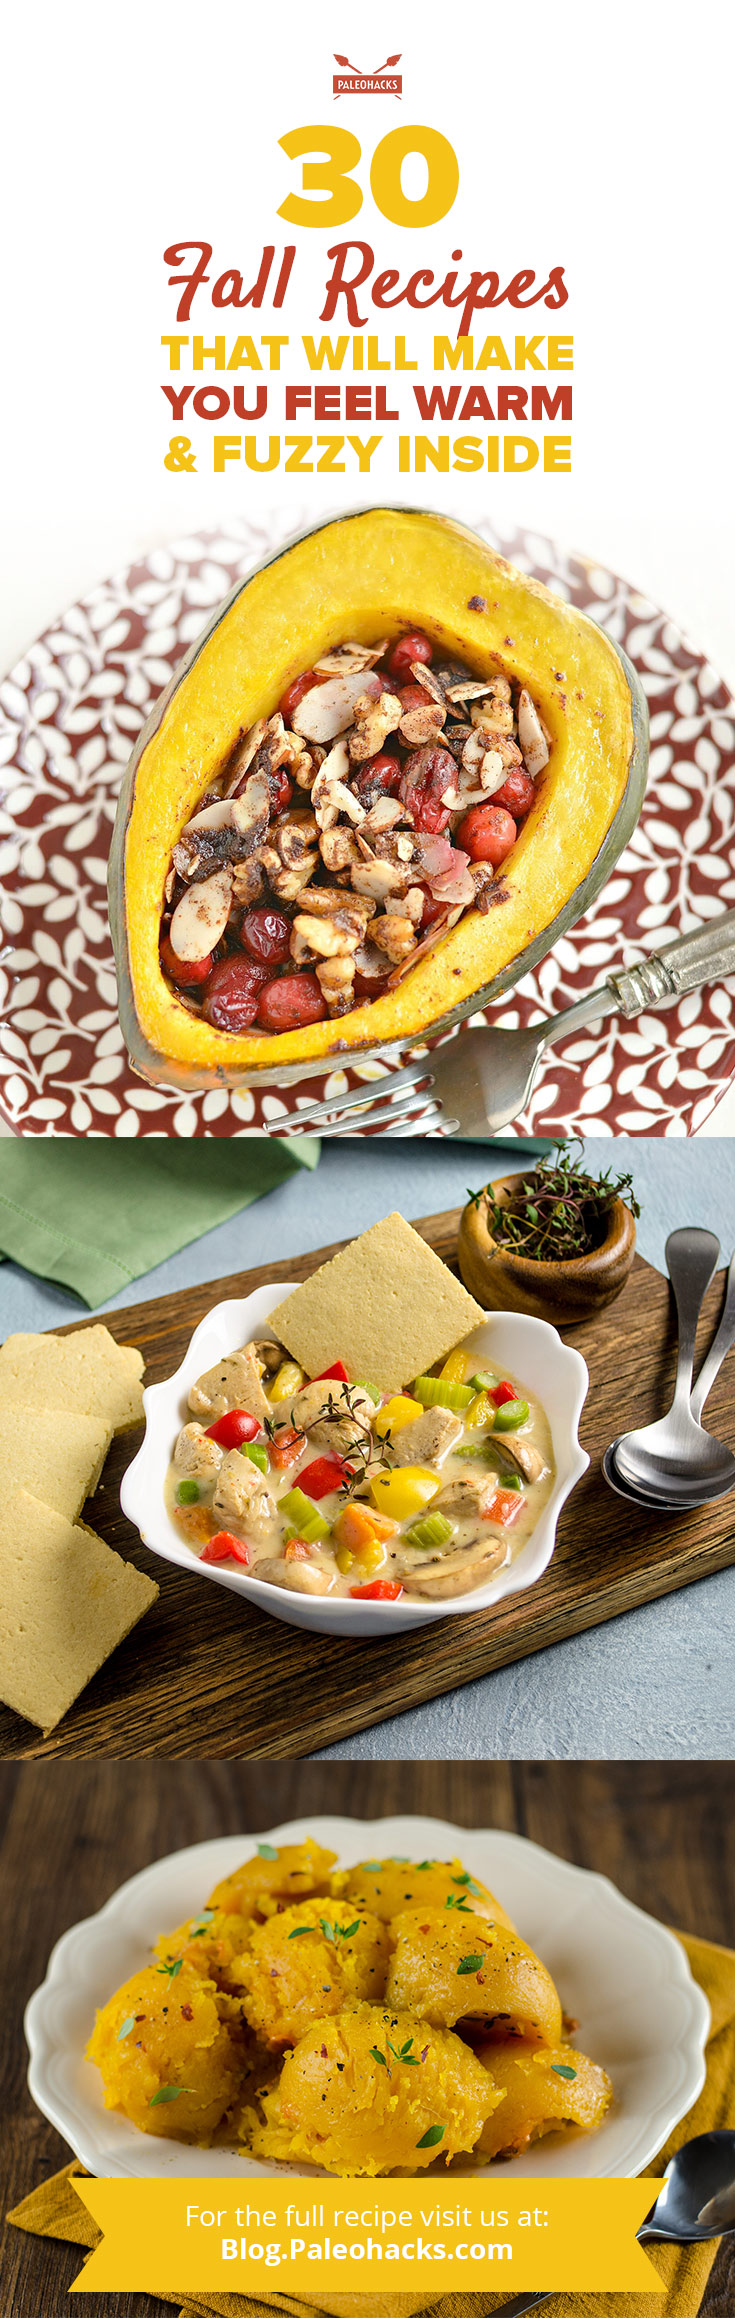 With hearty squash and fresh apples in season, sweet and savory come together in perfect unison in these comforting fall recipes.